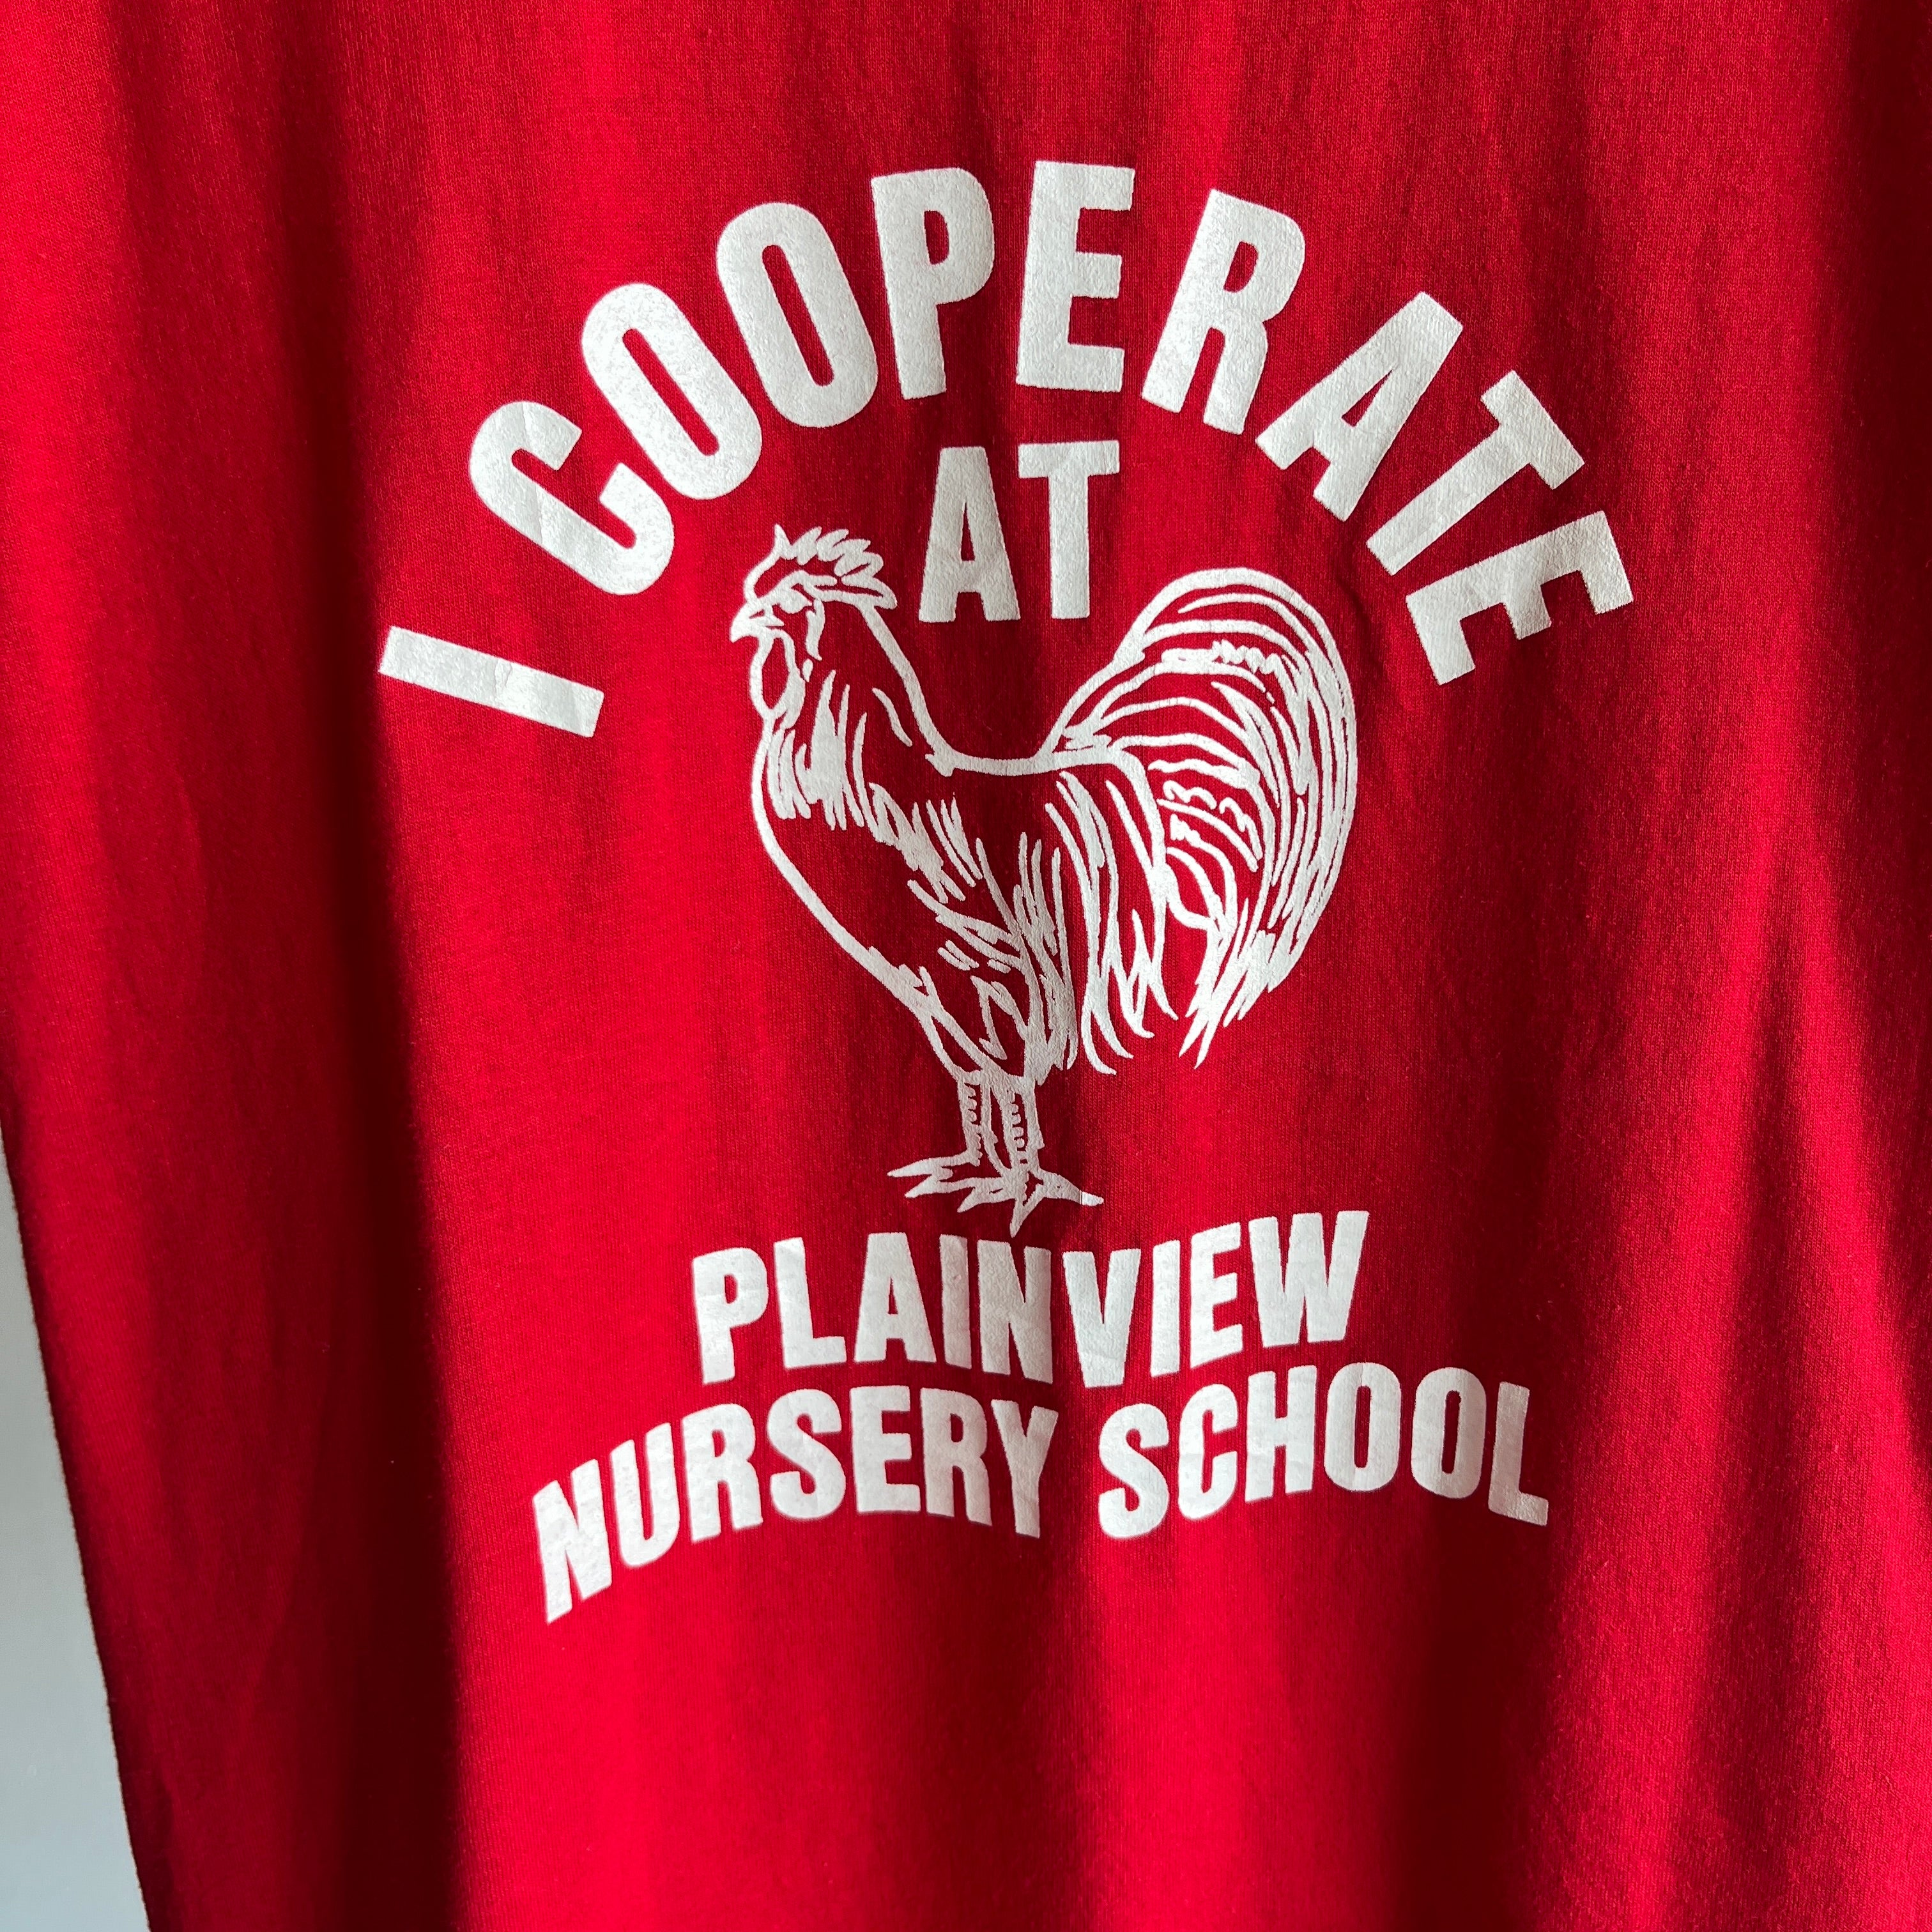 I Cooperate At Plainview Nursery School T-Shirt